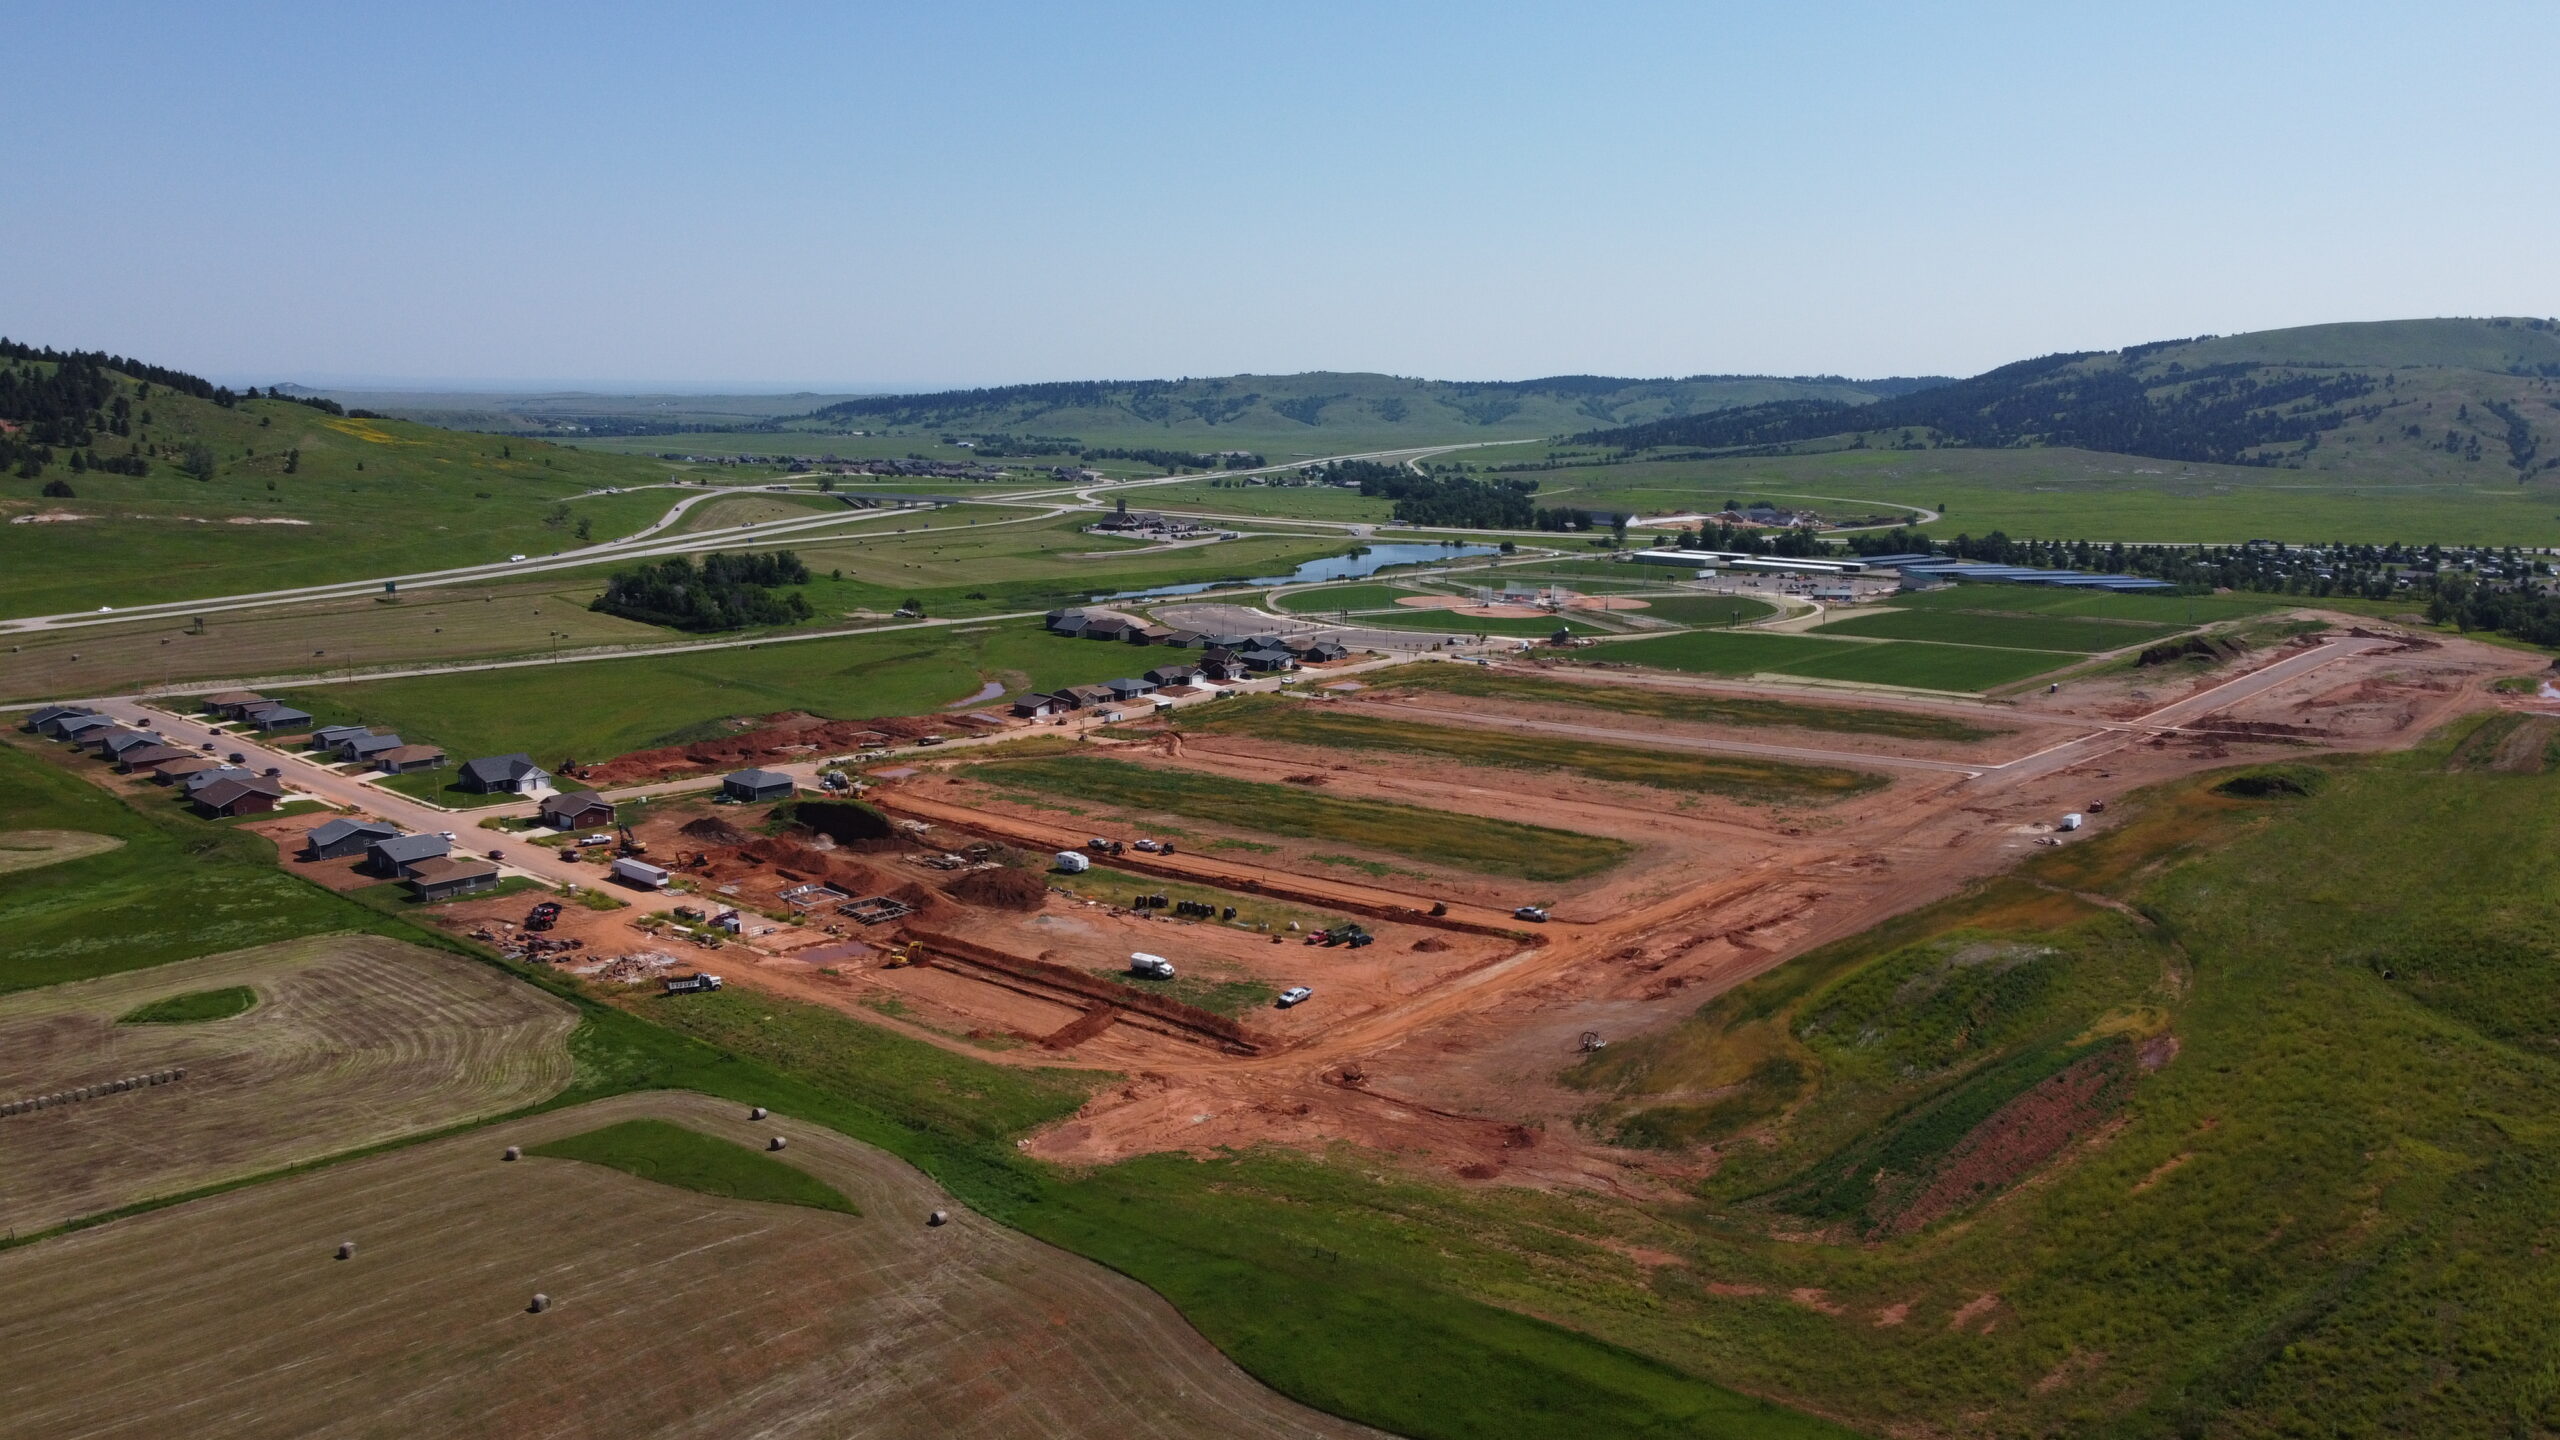 Sky Ridge in Spearfish SD. News homes continue to be constructed